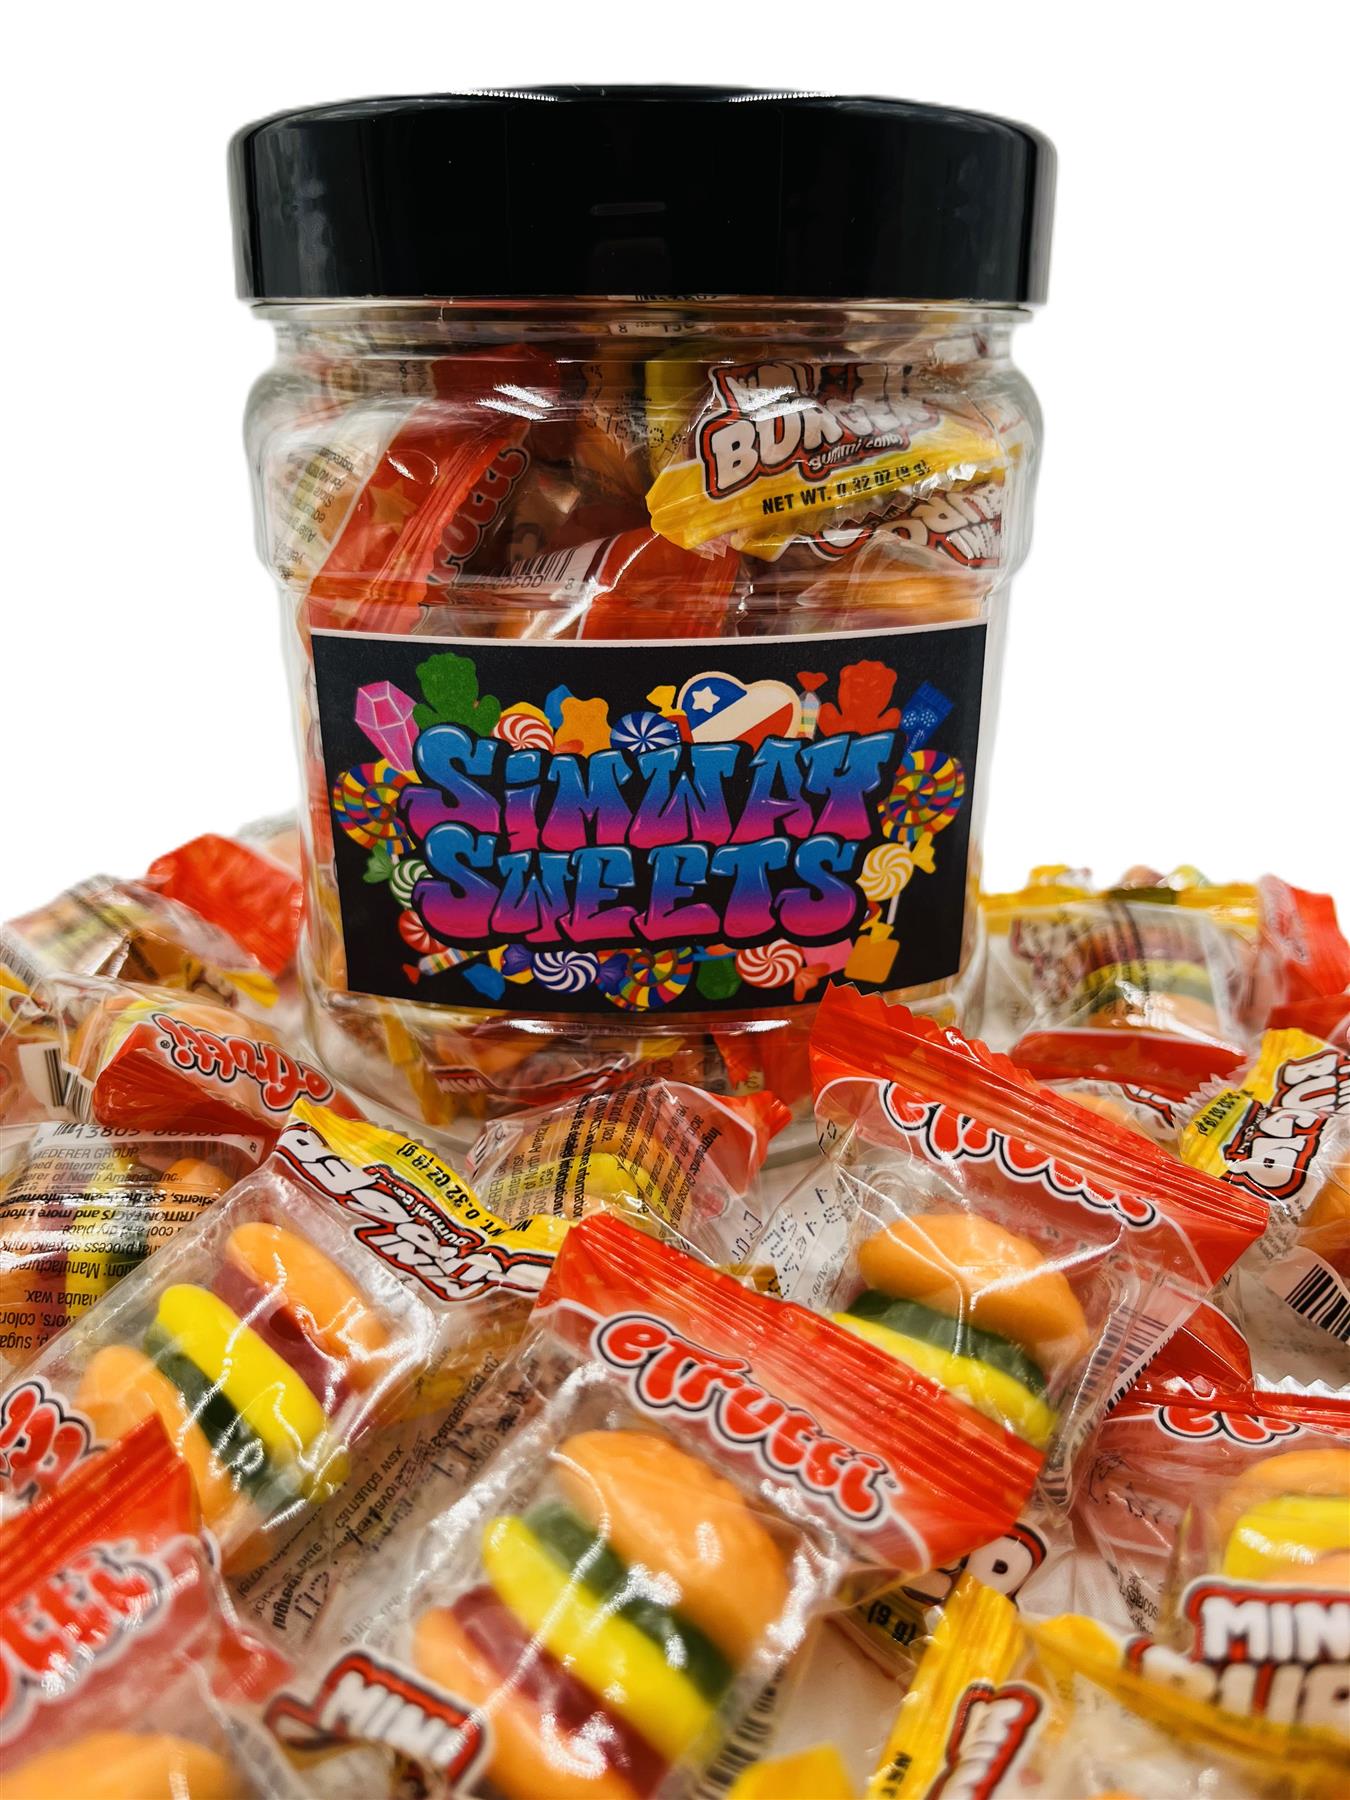 Simway Sweets Jar 385g - Gummi Burgers - Individually Wrapped American Sweets - Approximately 30 Pieces